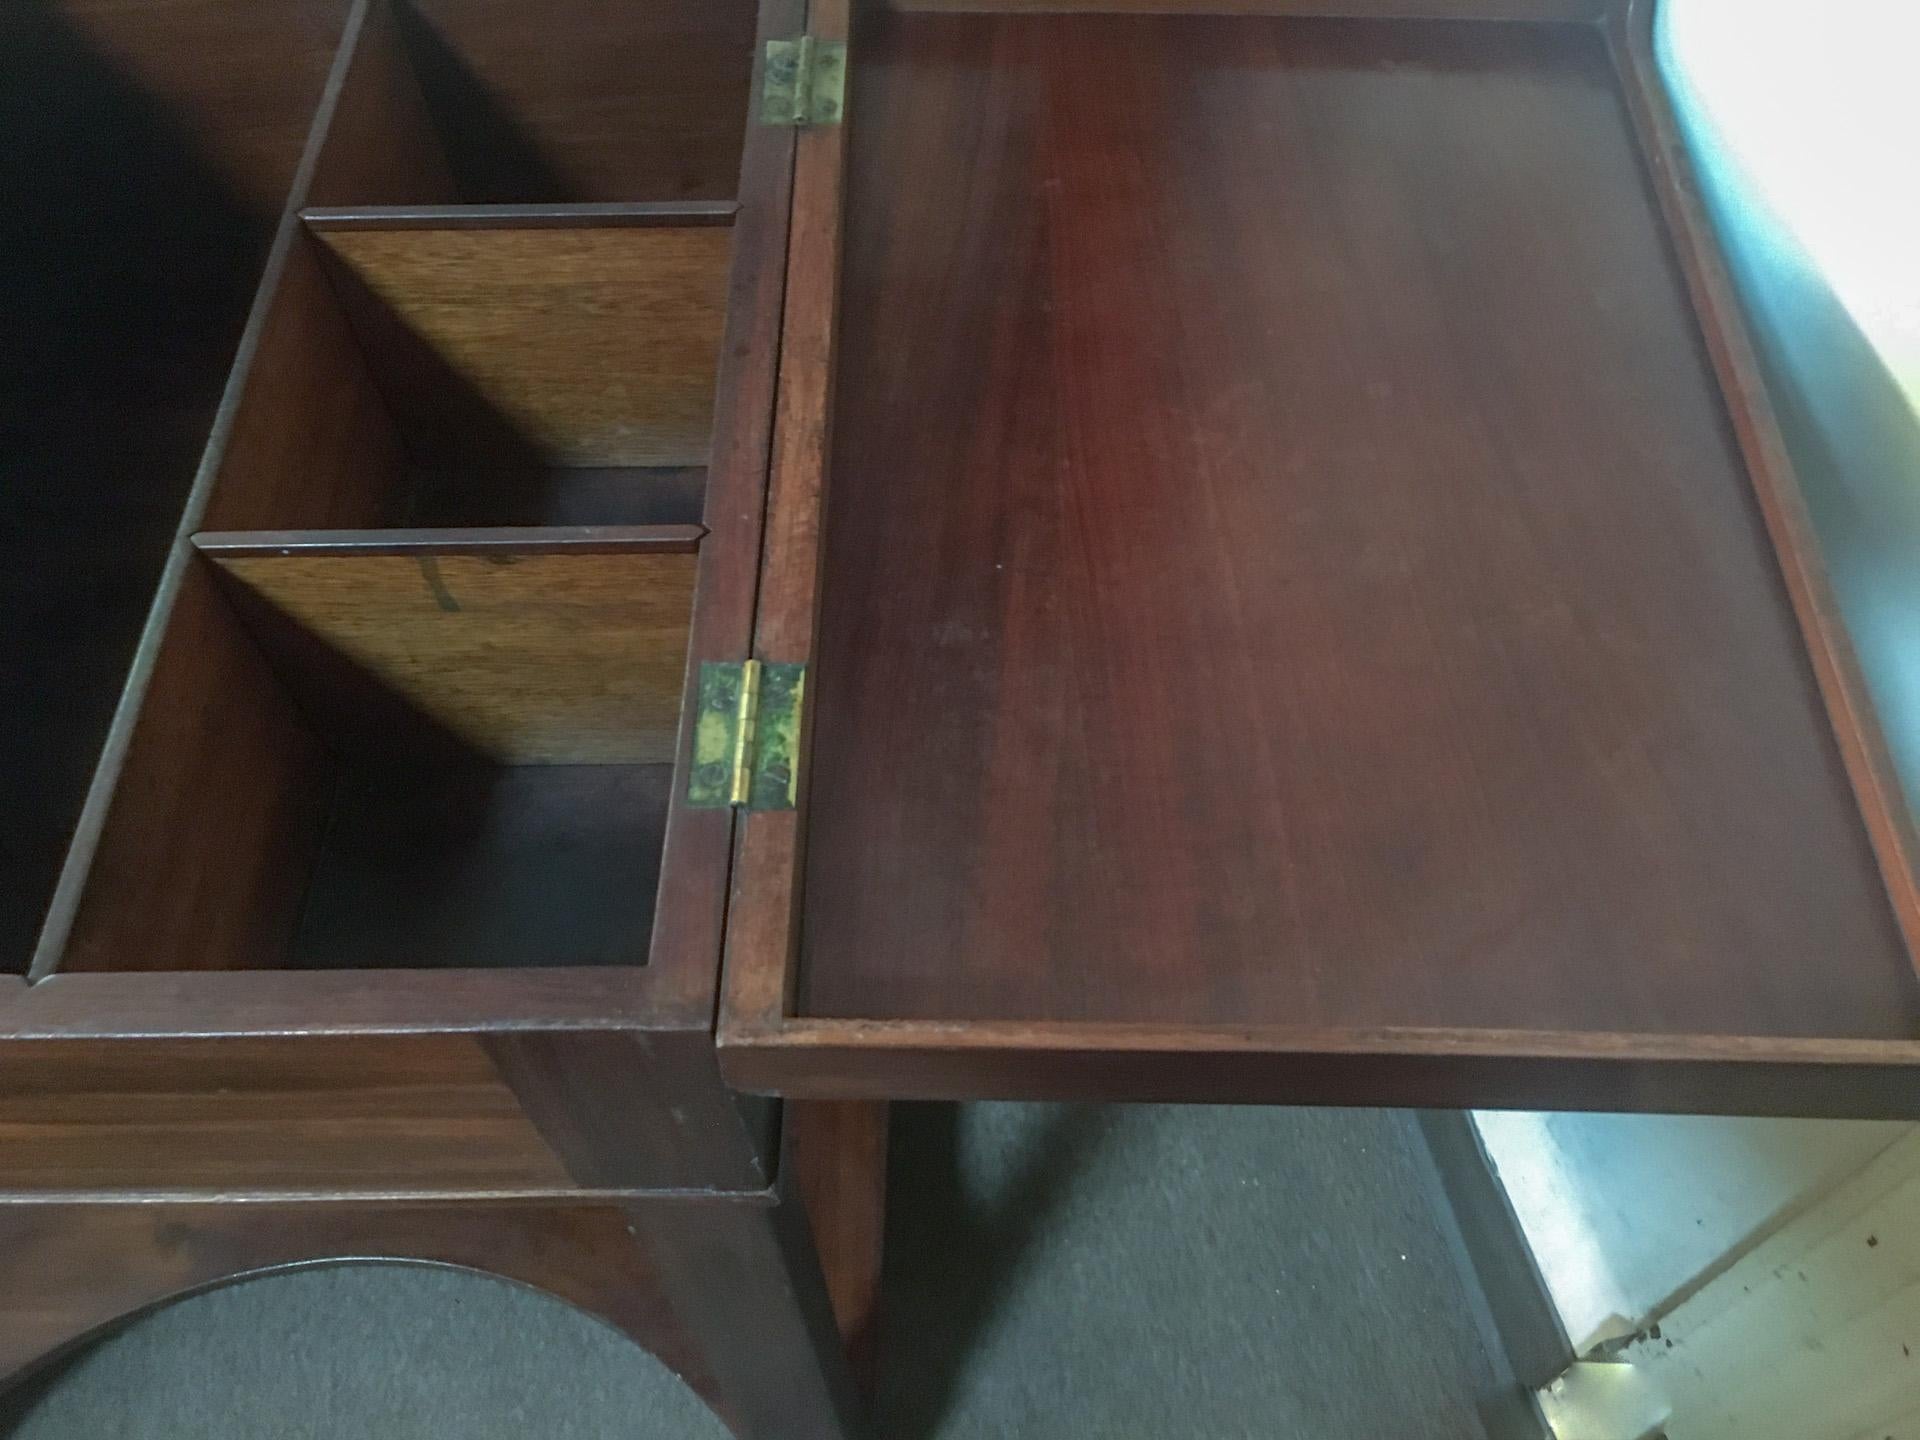 This handsome Napoleon III slightly rectangular mahogany side table with two flip tops doubles as a work or utility table with another curved shelf at the bottom. The inside features a large middle section, a long covered compartment with sliding